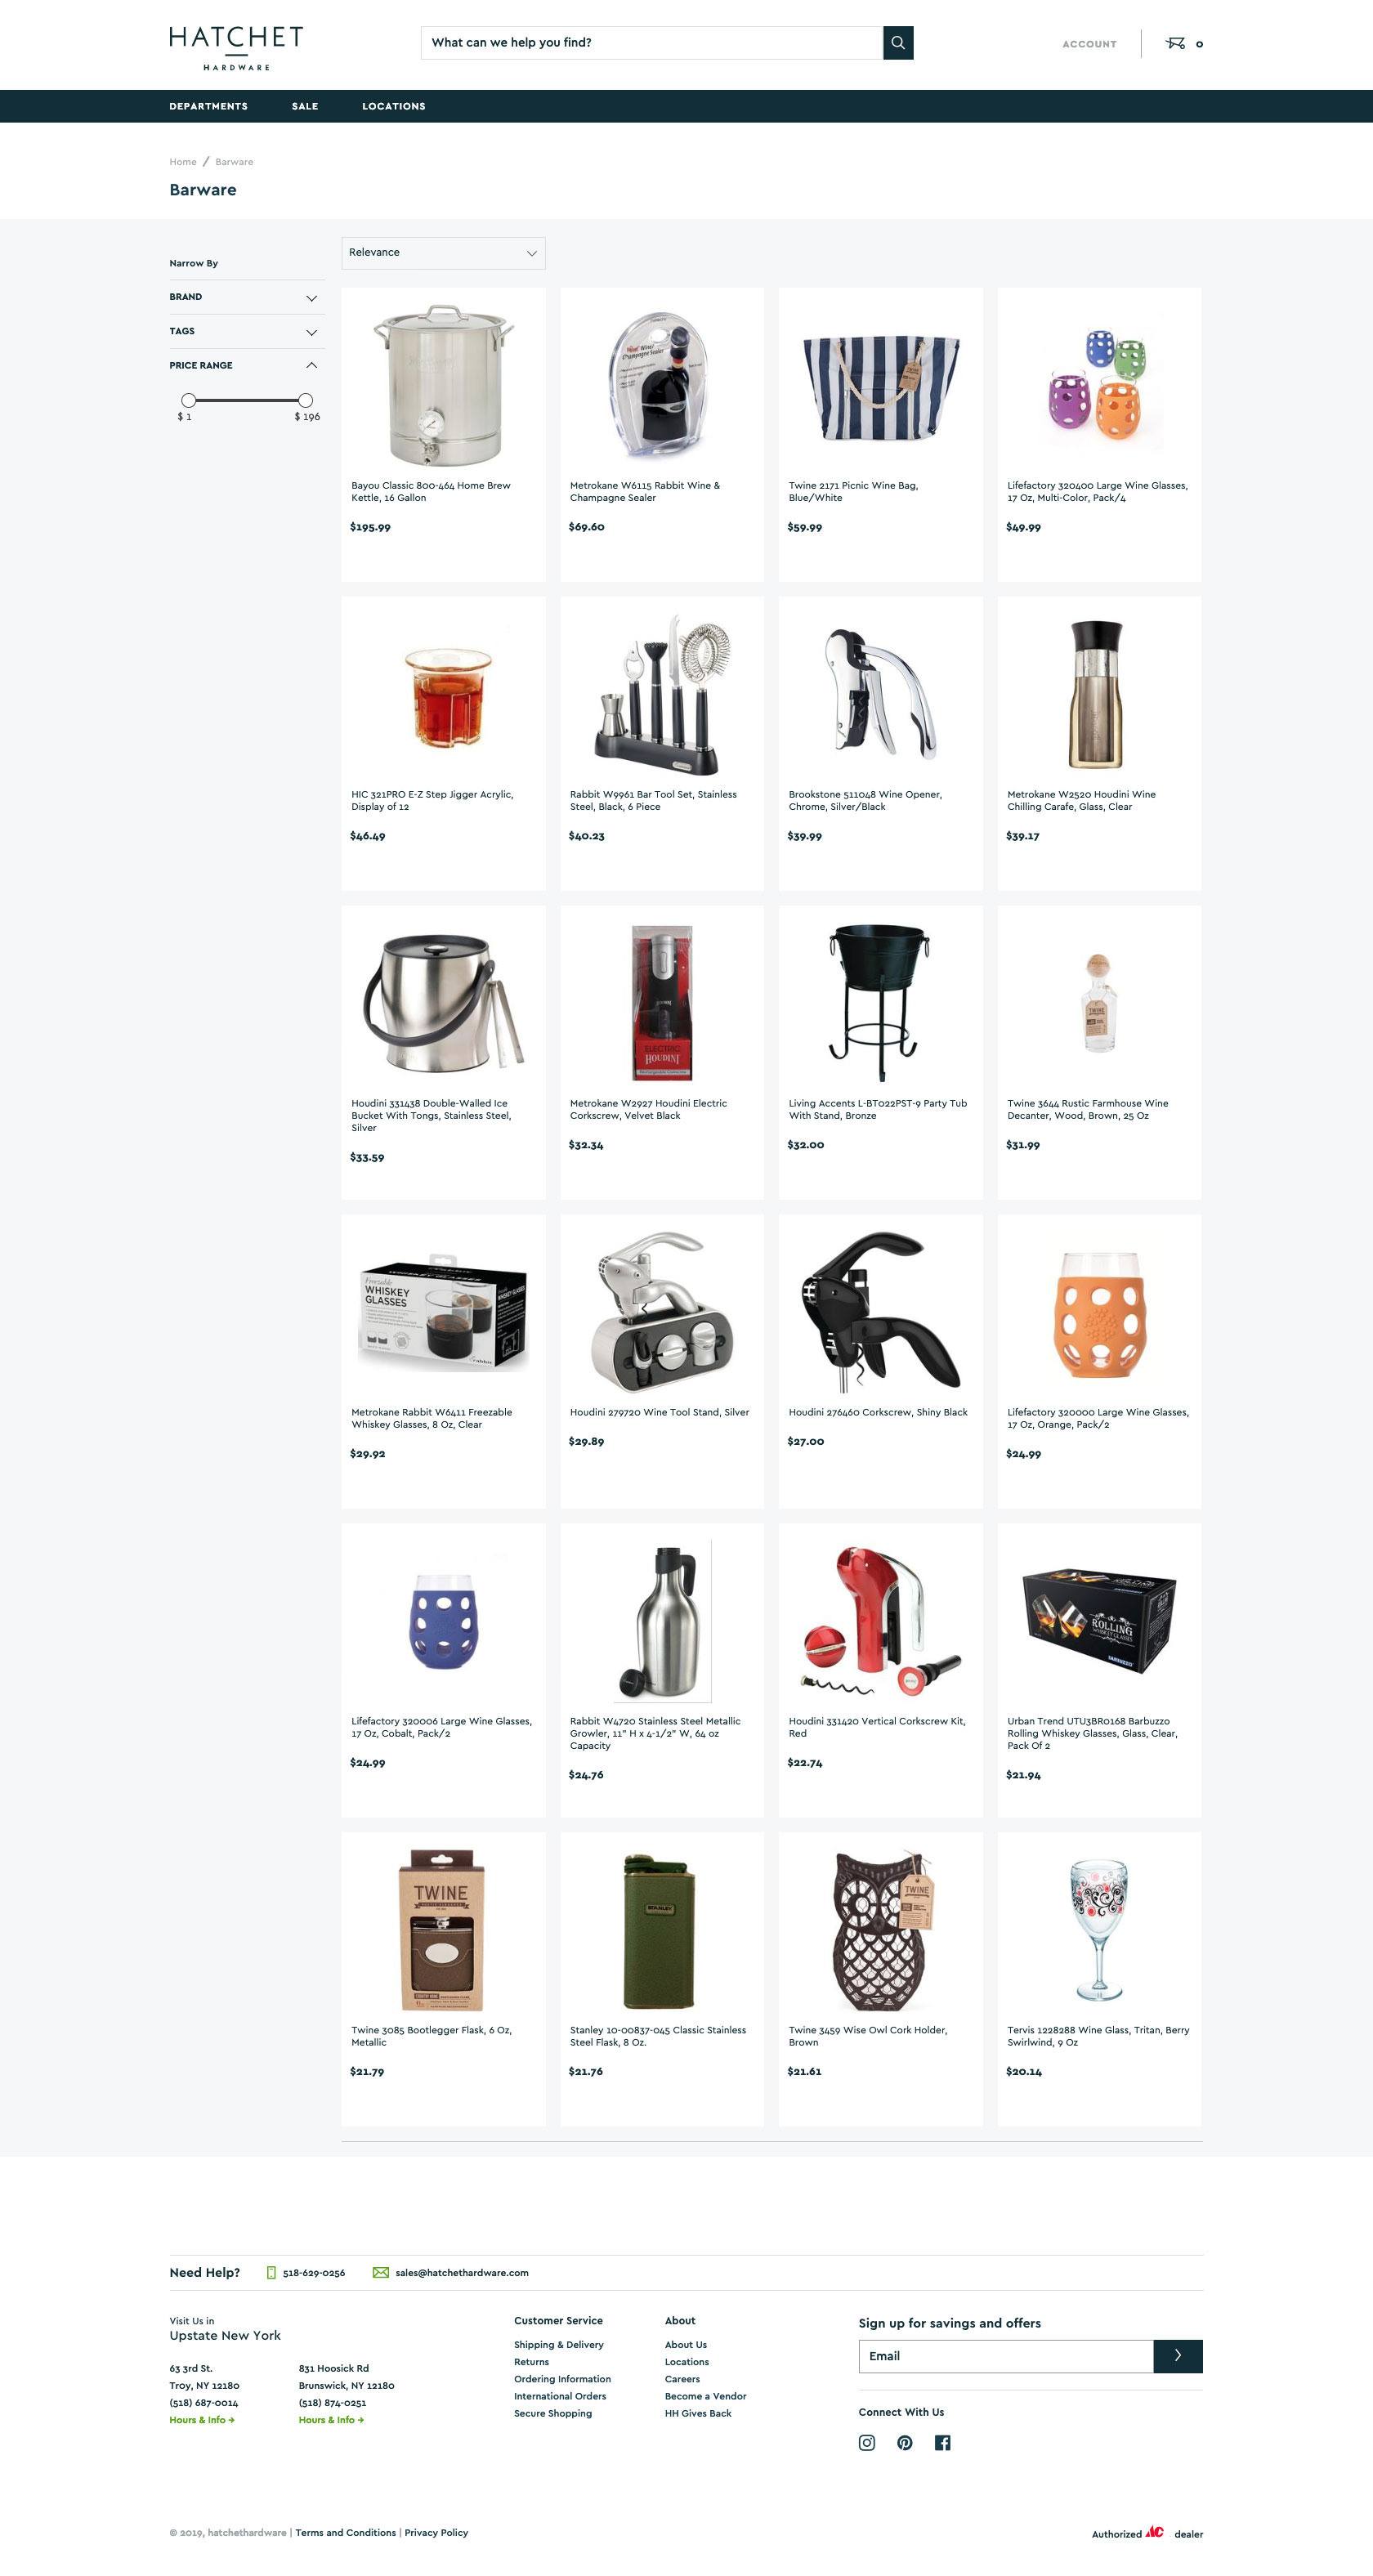 A screenshot of a product collection page from Hatchet Hardware for desktop